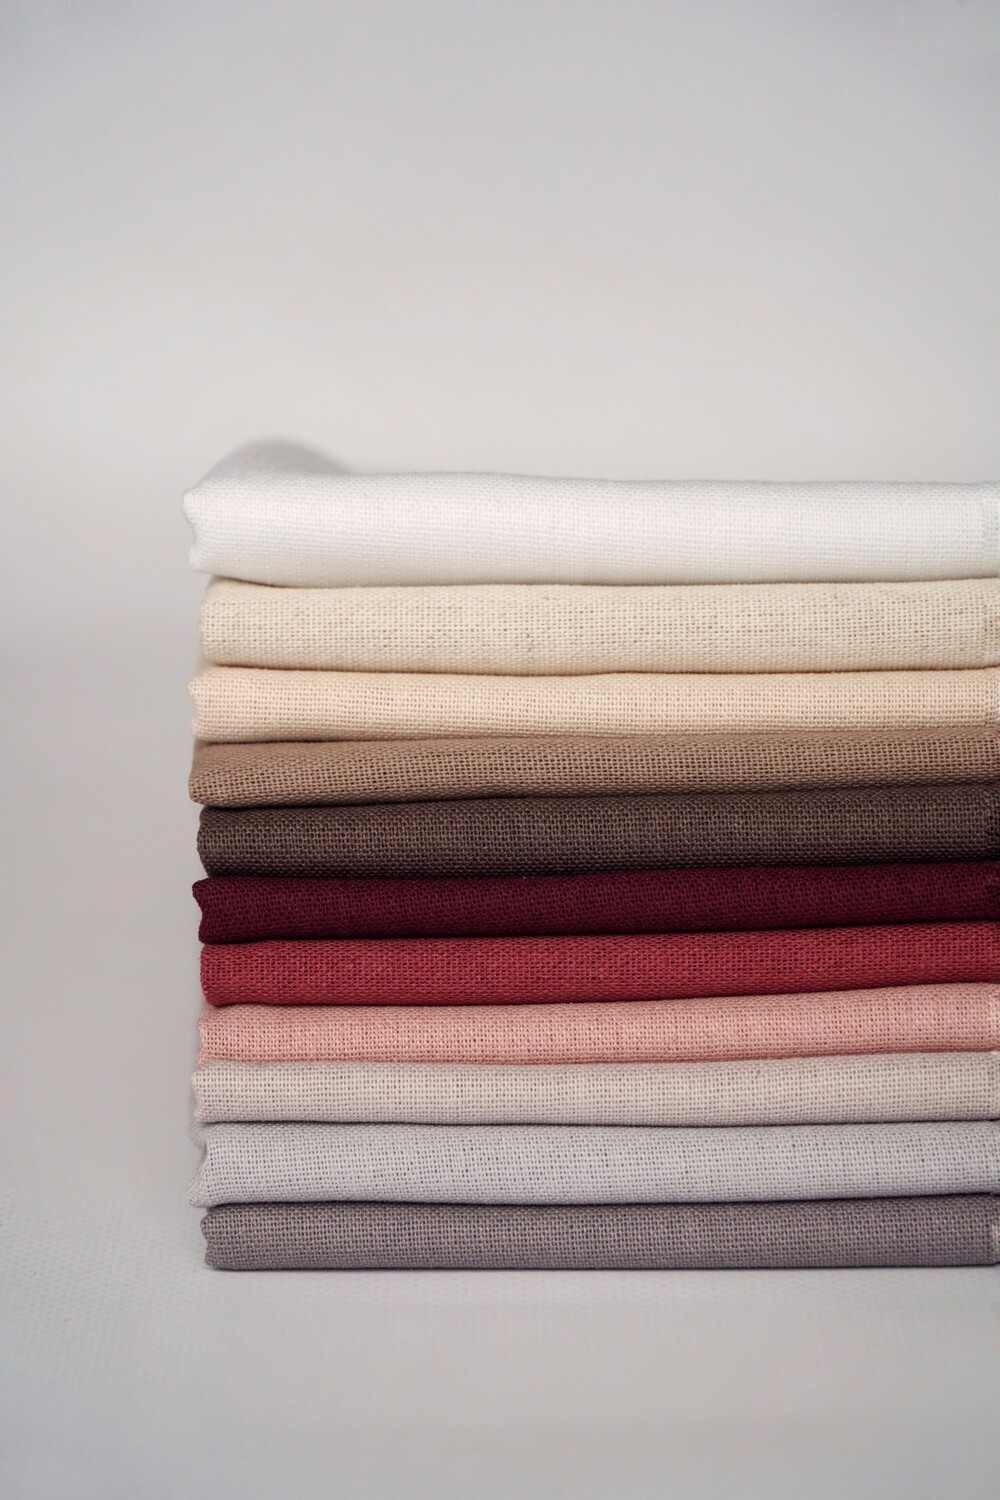 Linen fabric by meter 11 colors